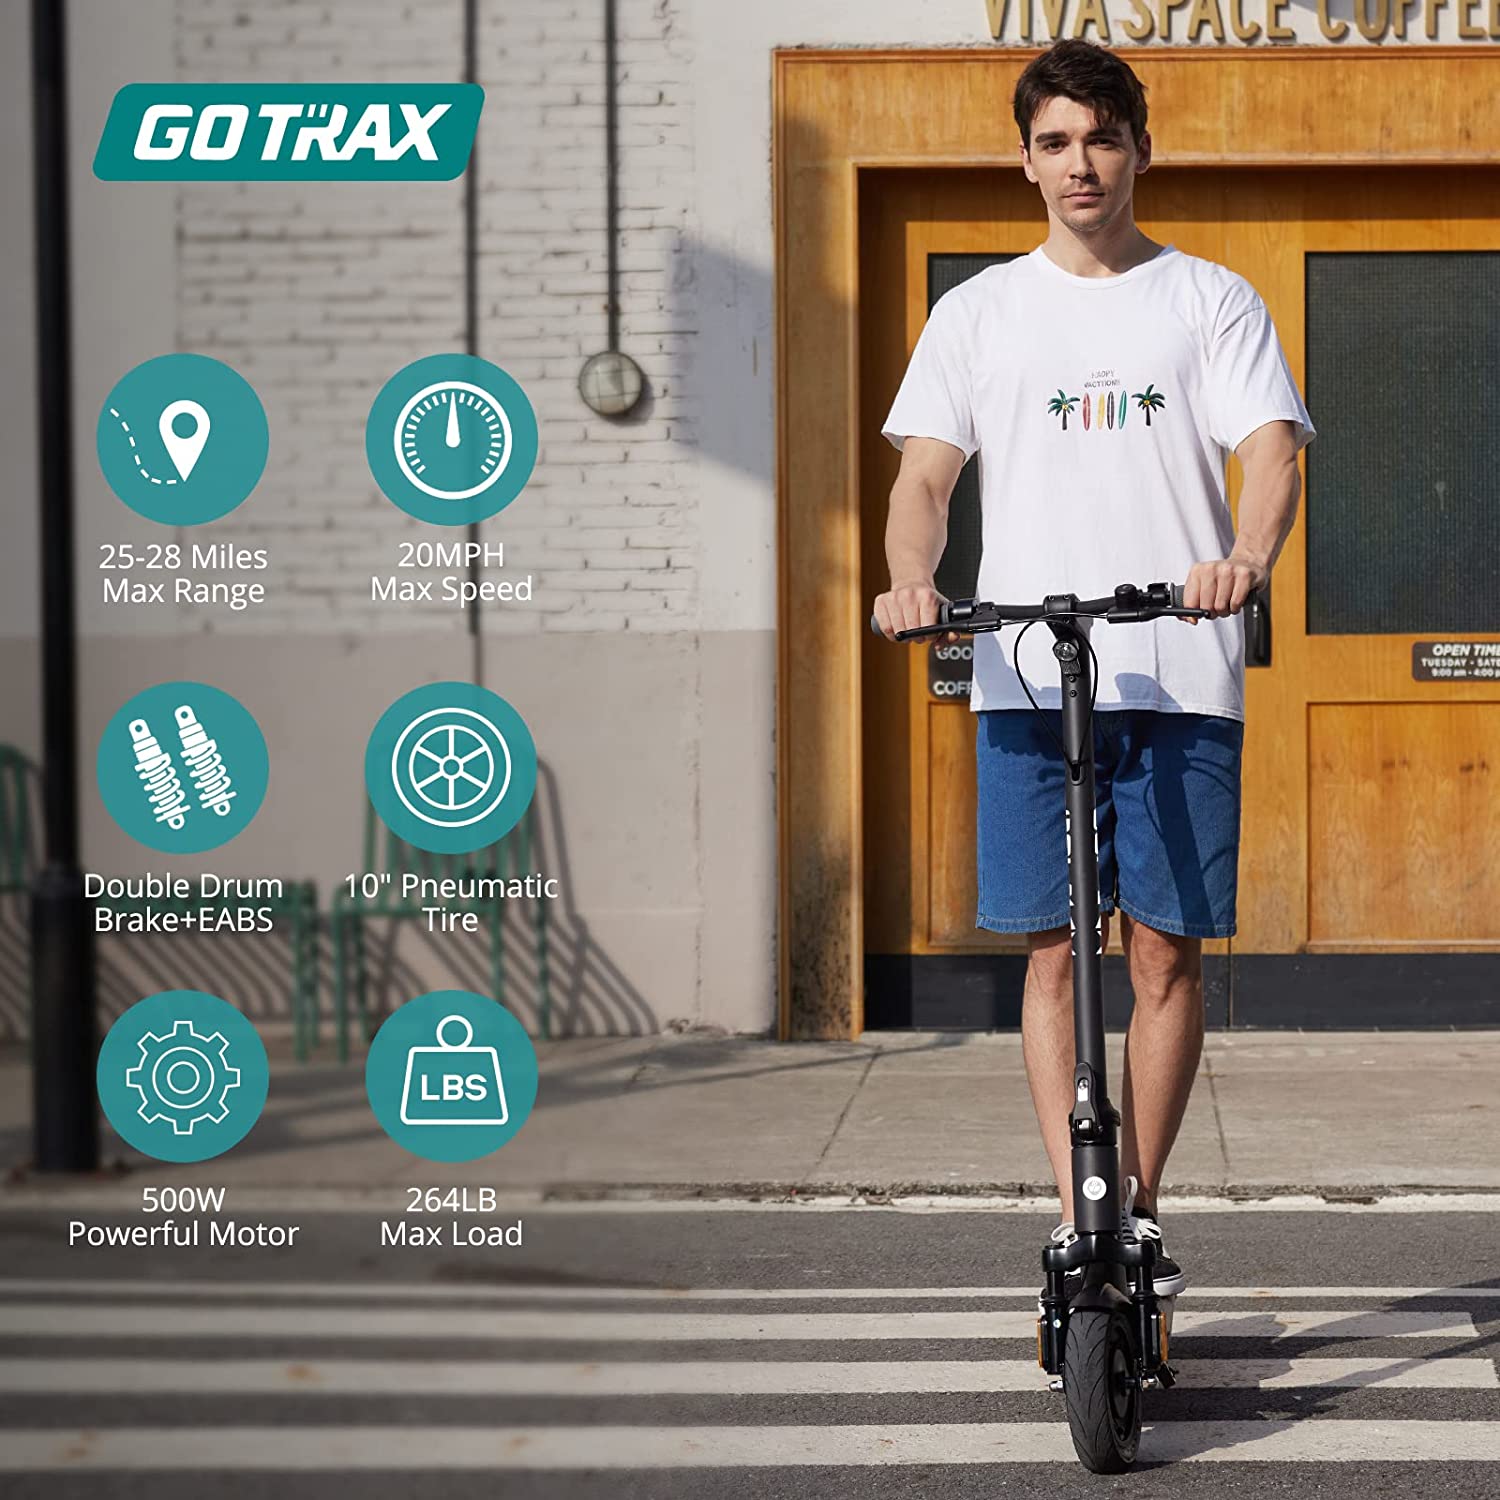 Gotrax G5 Long Range Electric Scooter Foldable Plus Ambient Lights 10" -Max 45KM Range & 32KPH Max Speed